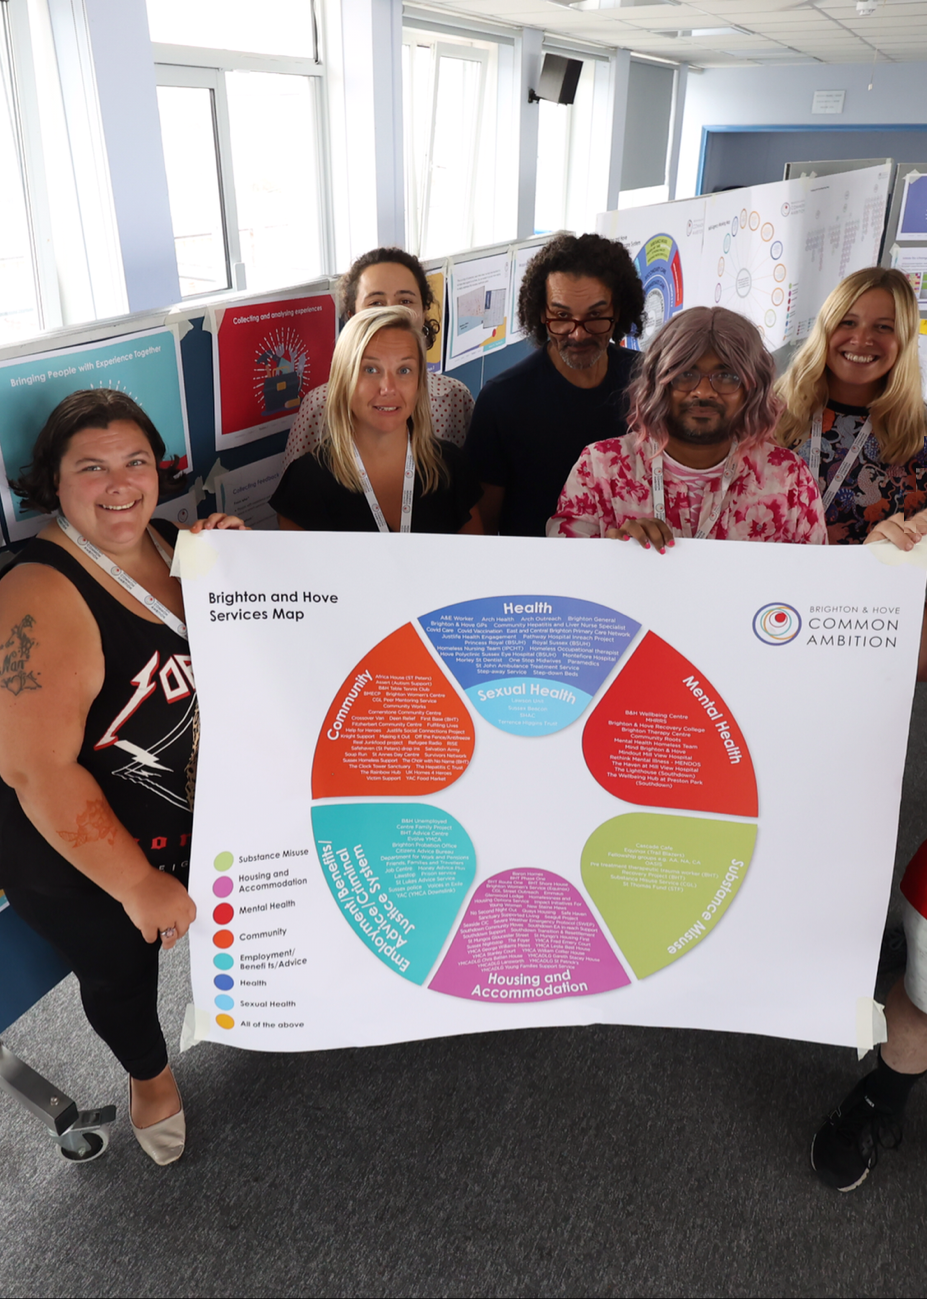 members of the common ambition steering group holding up a poster of a service map and smiling at the camera